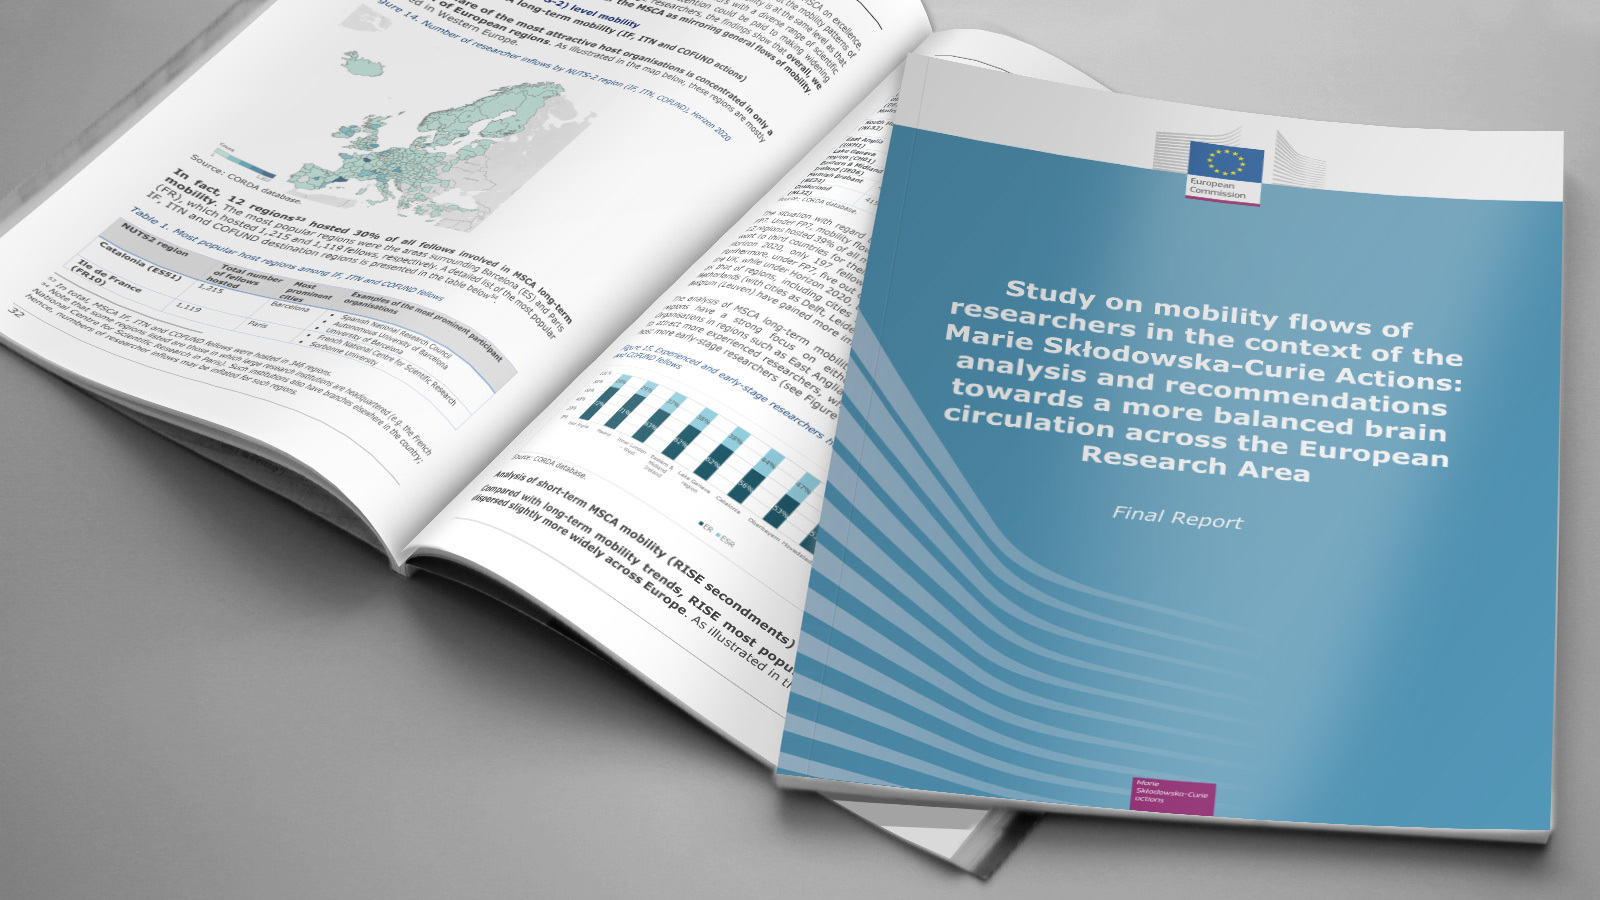 PPMI completes the study on mobility flows of researchers in the context of the Marie Sklodowska-Curie Actions